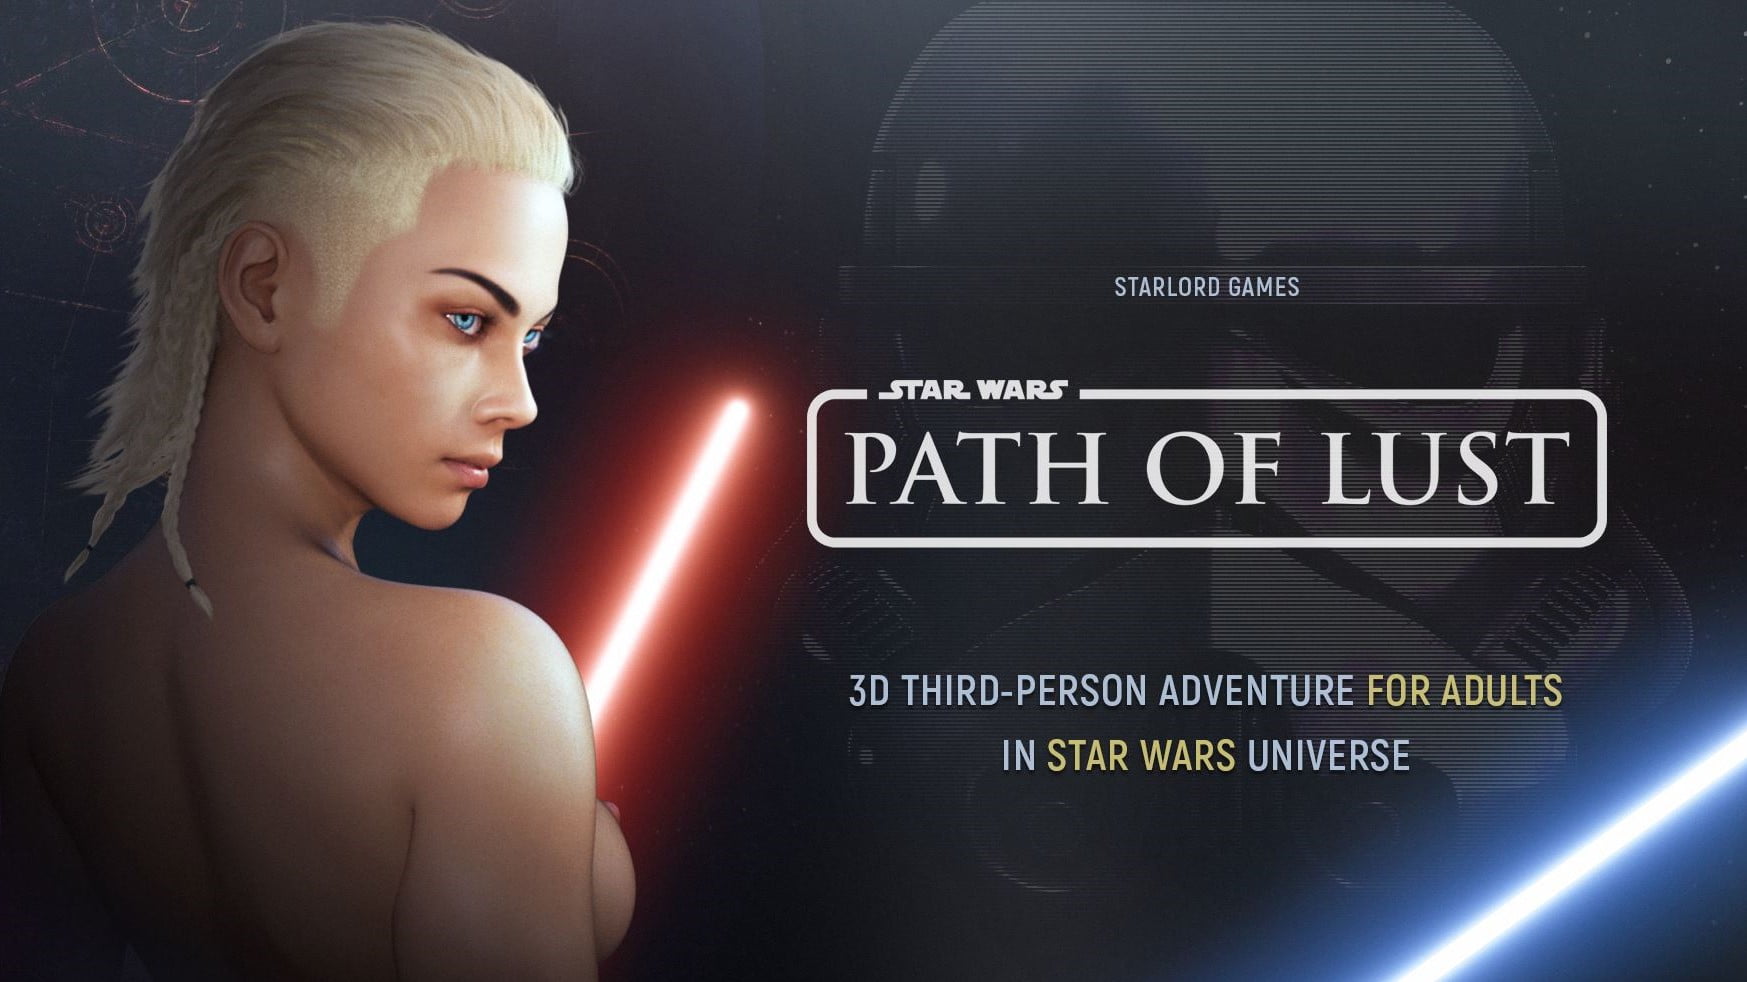 Porn Star Wars Games - Unity] Star Wars: Path of Lust - v0.1.1 by StarLordGames 18+ Adult xxx Porn  Game Download